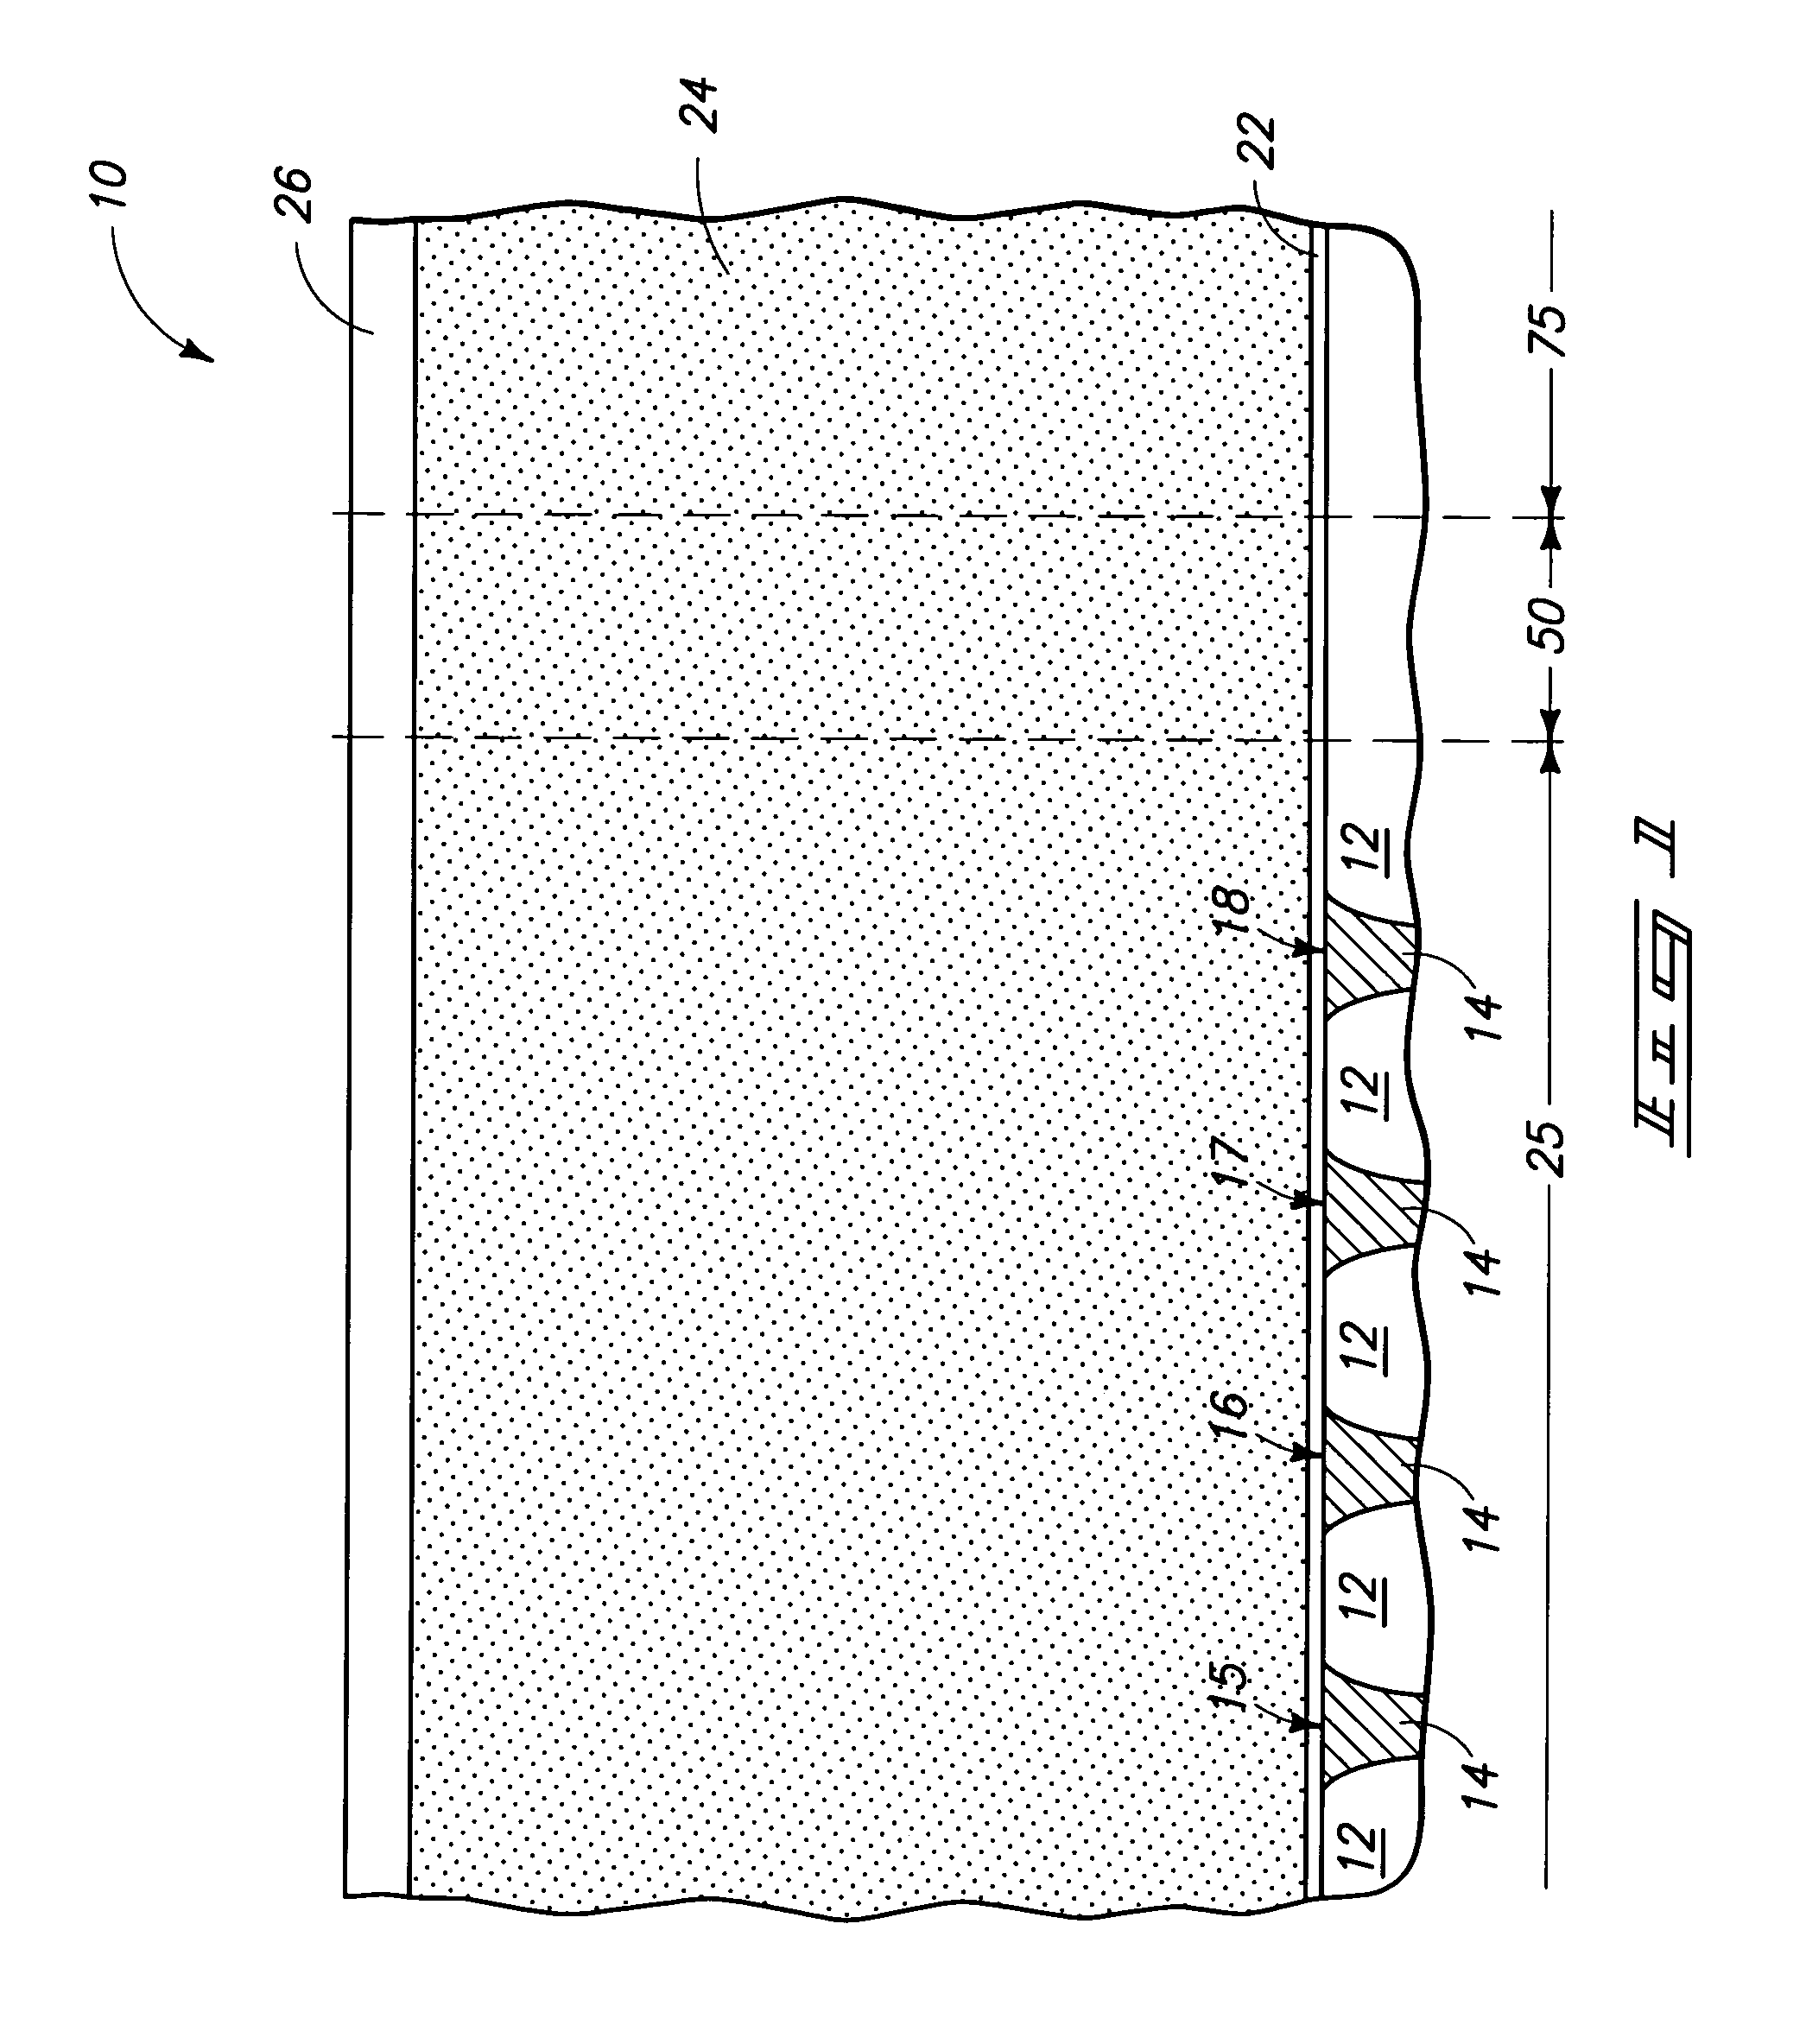 Methods of etching polysilicon and methods of forming pluralities of capacitors